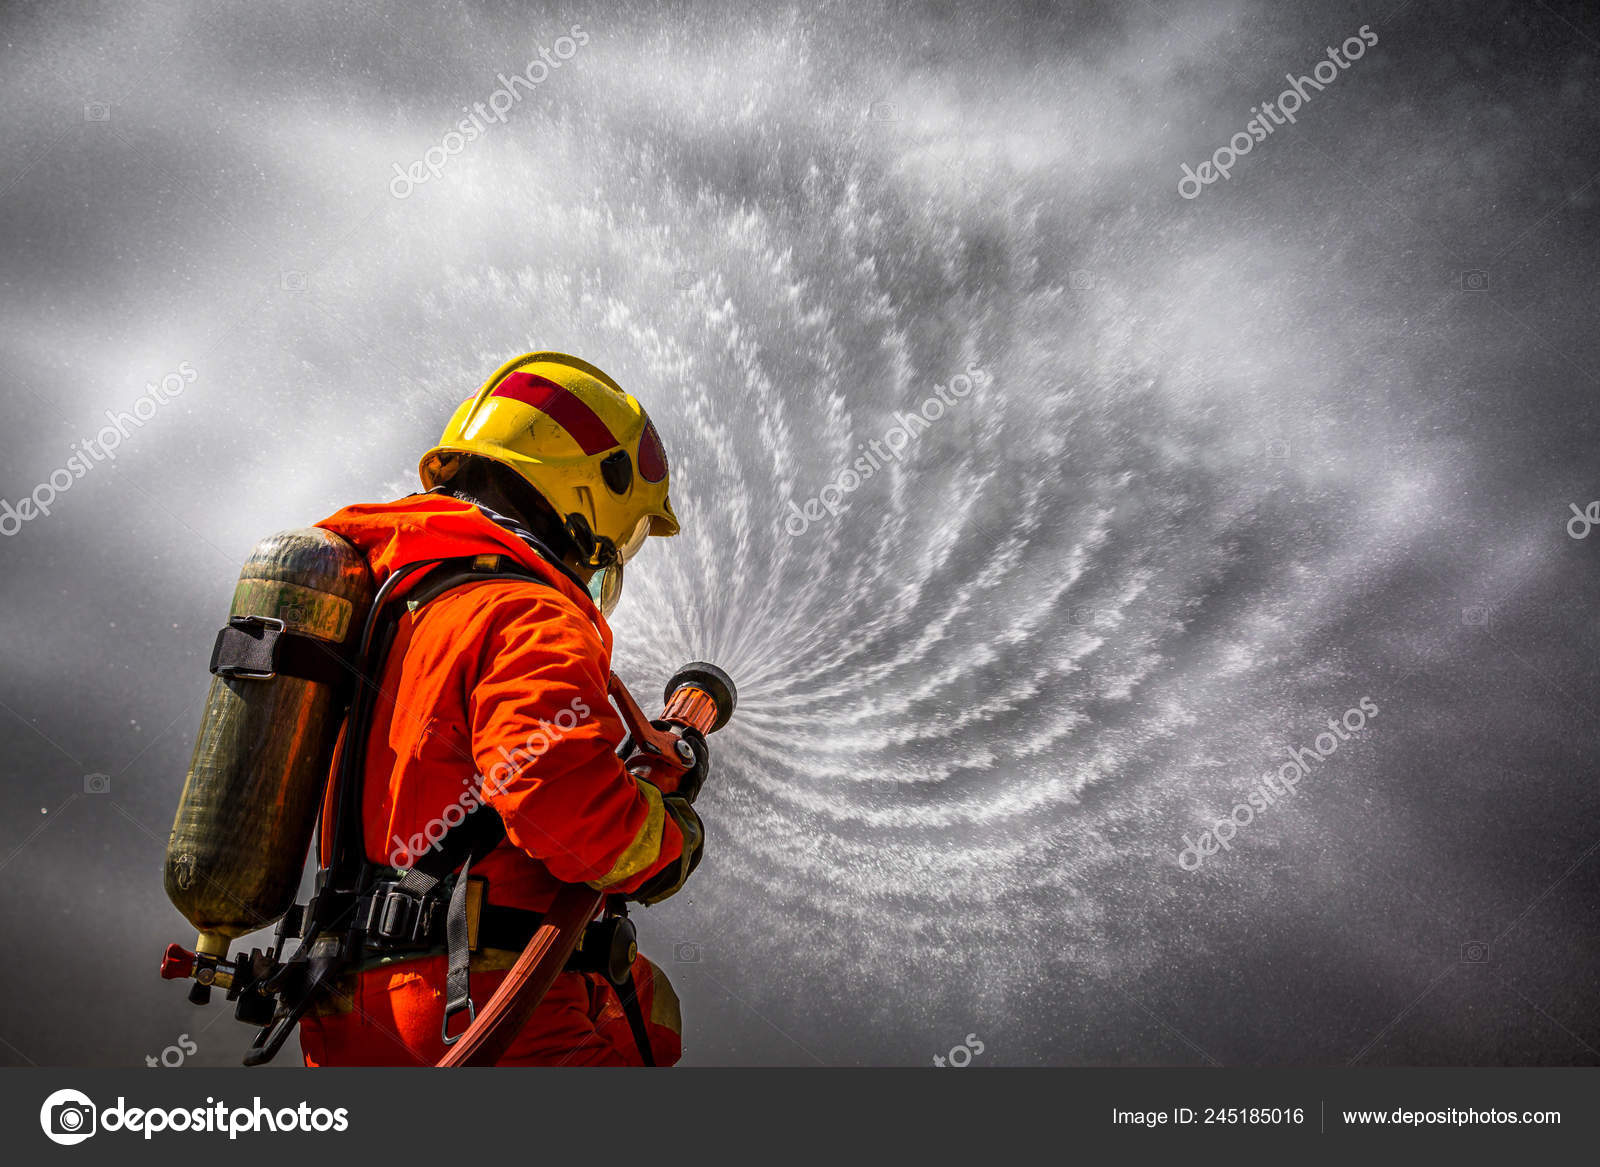 firefighter fighting fire with hose